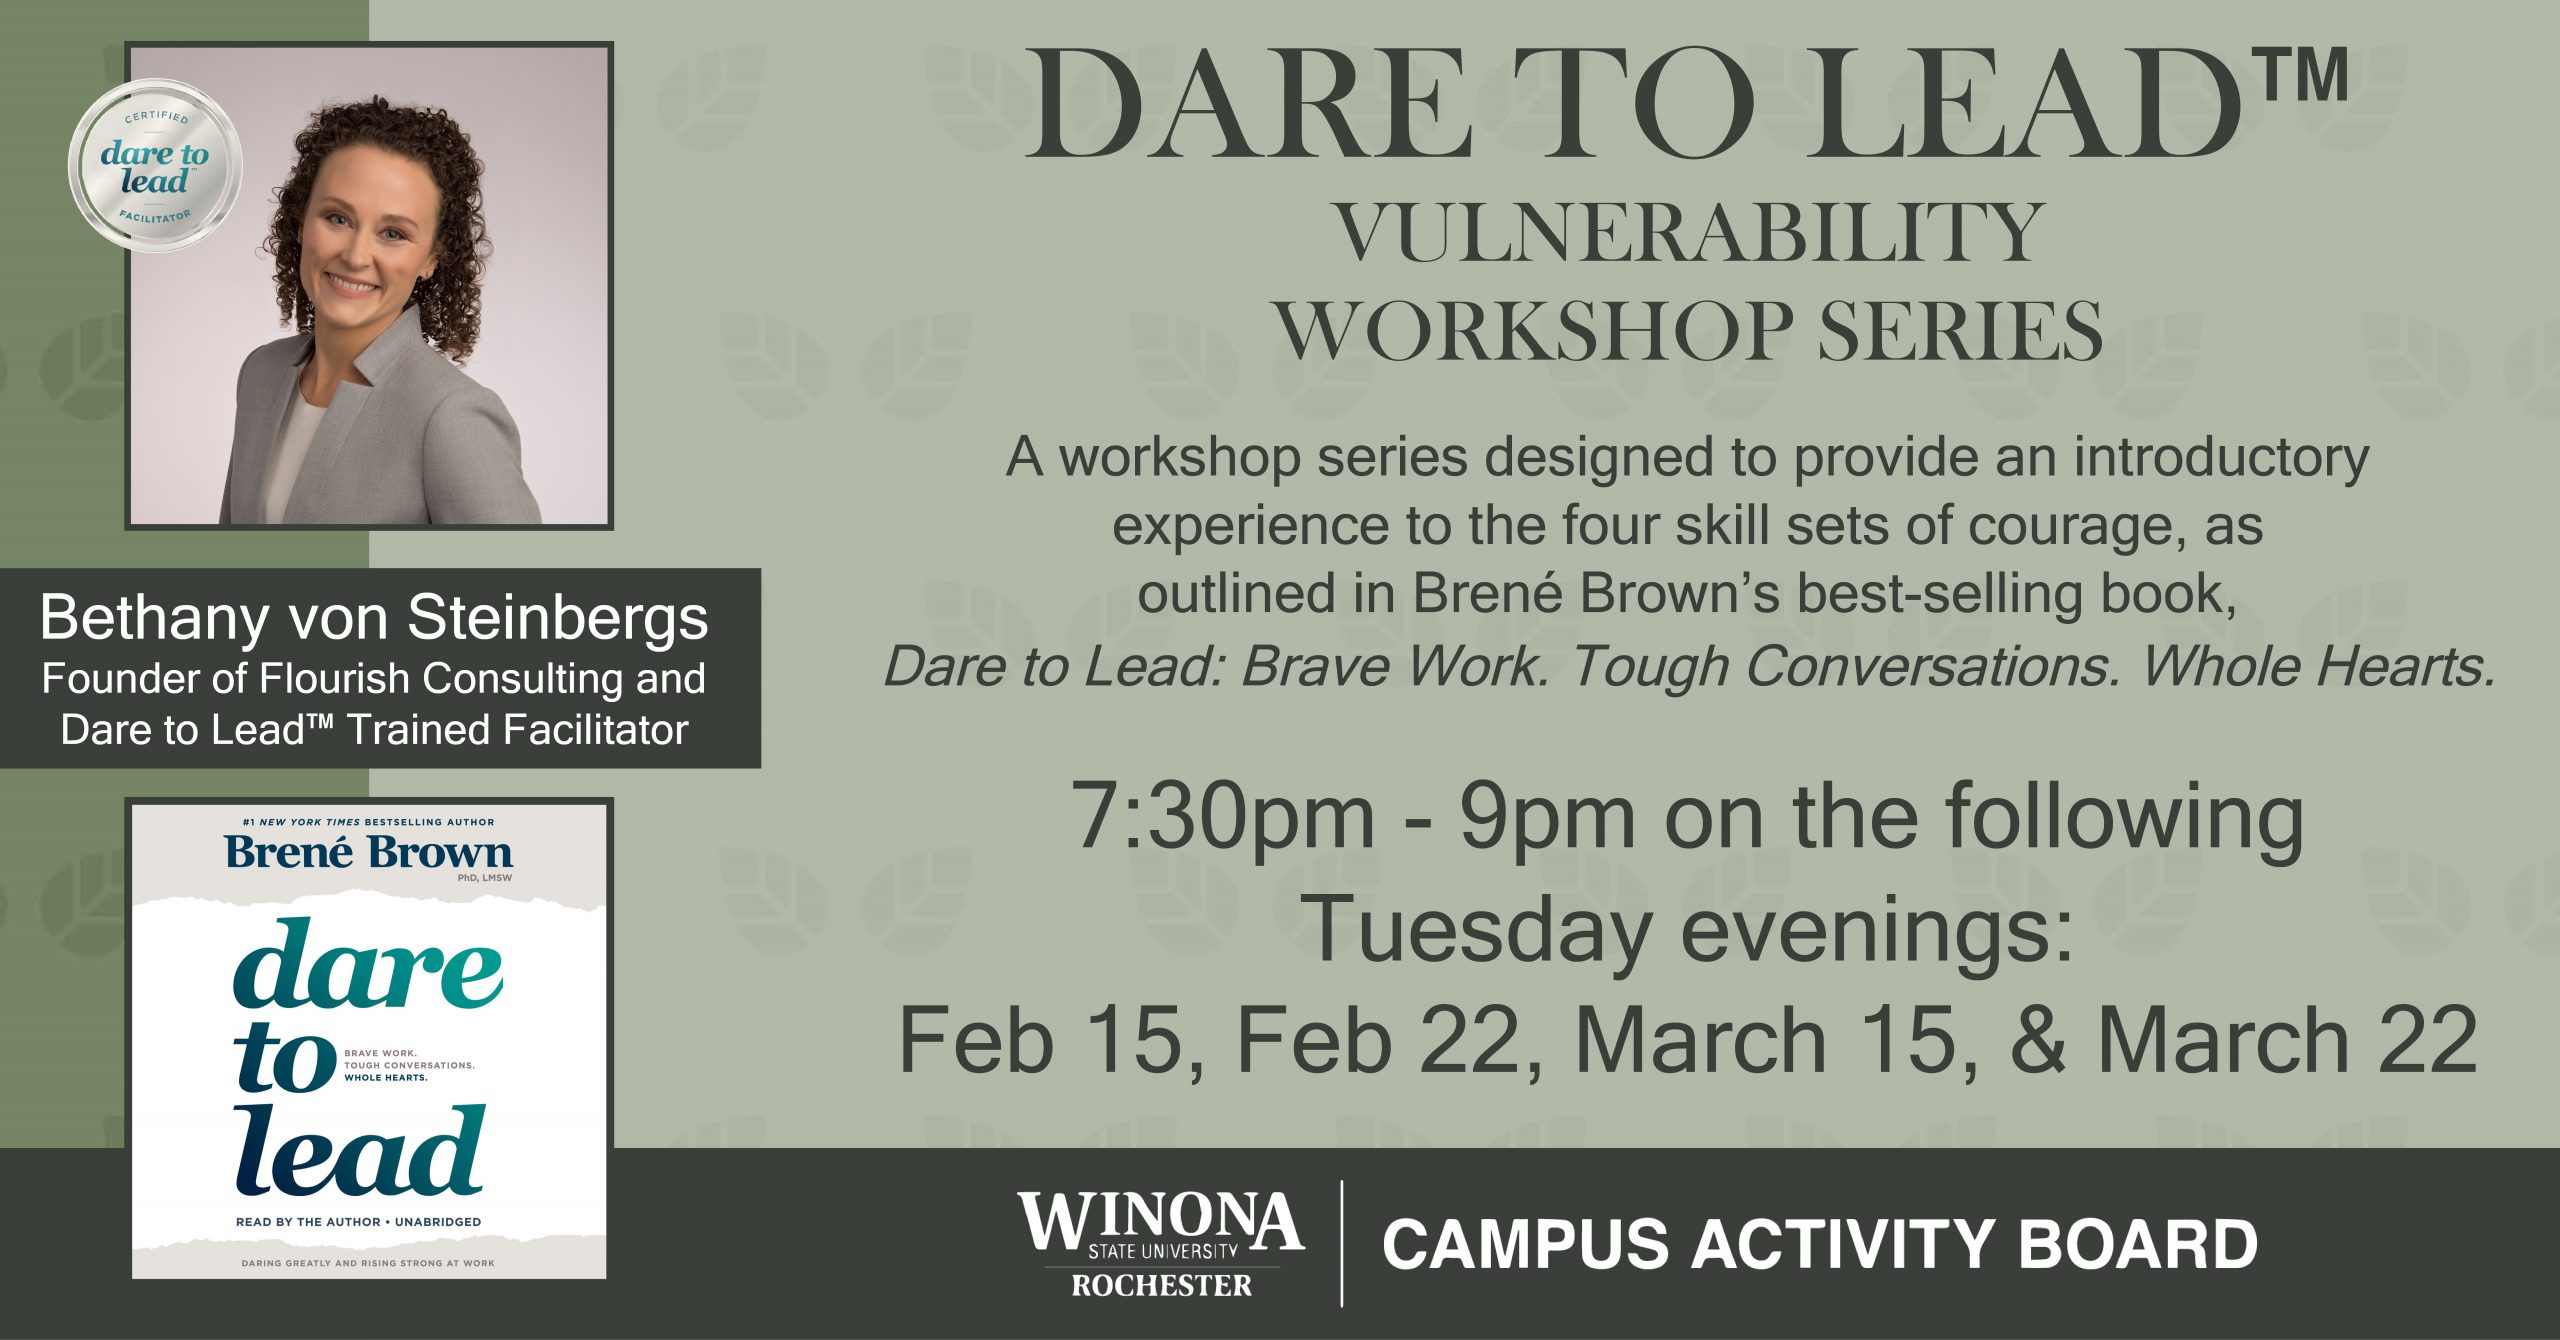 Dare To Lead Workshops will be held virtually on Tuesday evenings from 7:30-9 PM on February 15, February 22, March 15, and March 22